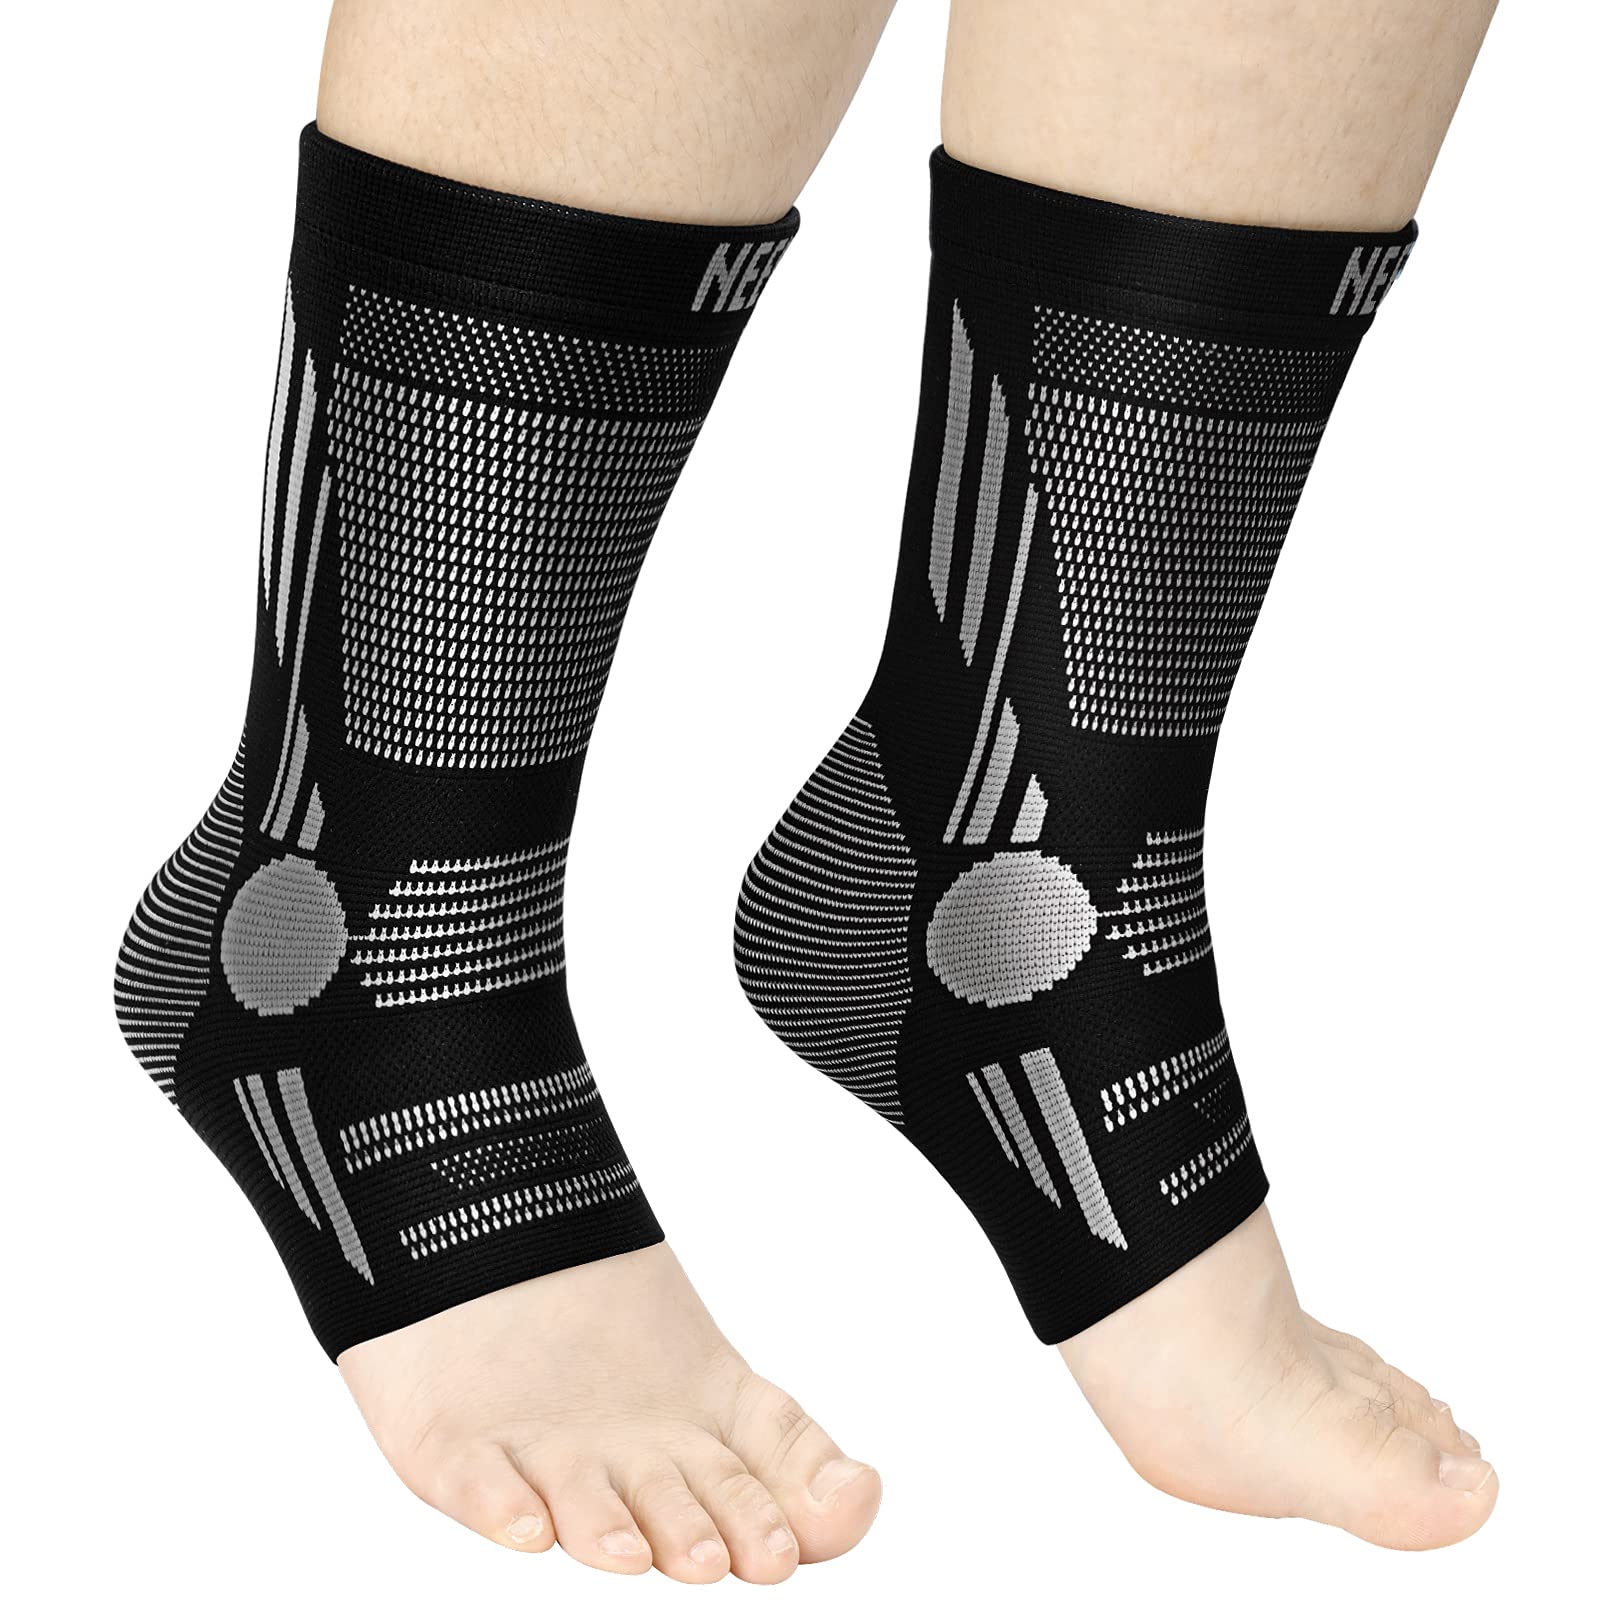 NEENCA Professional Ankle Brace Compression Sleeves (Pair), Ankle